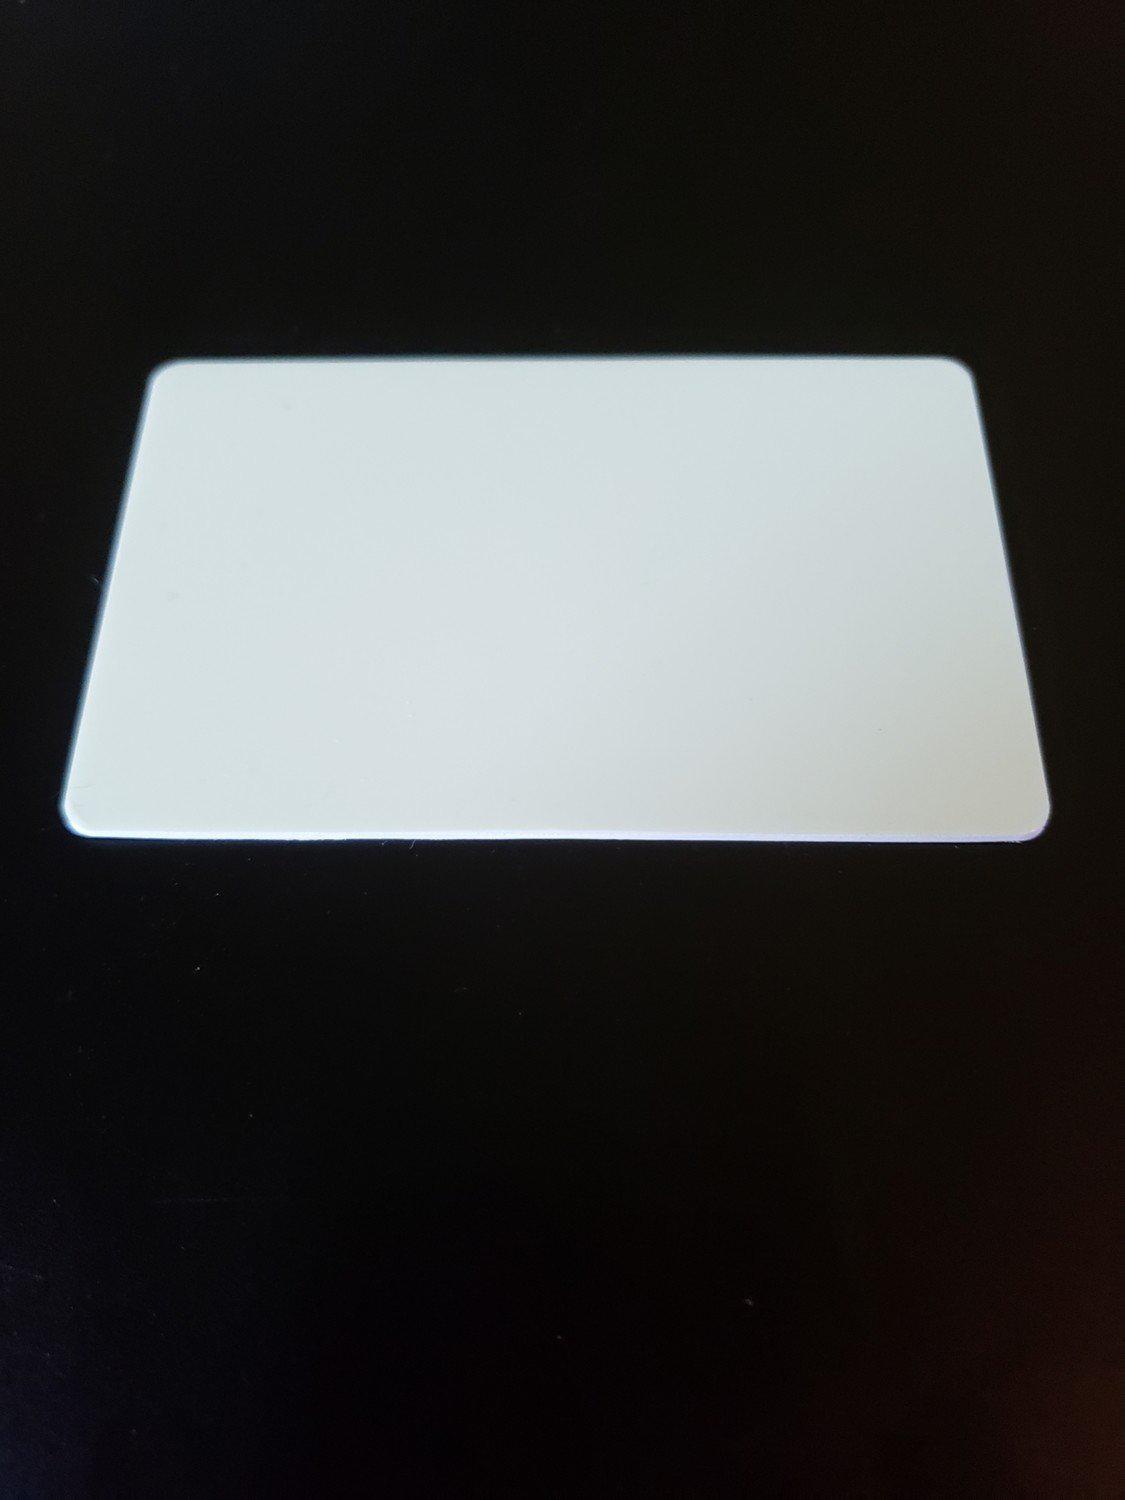 The Glow Card, a glow in the dark credit card that's like having a reusable glow stick in your wallet. The glow in the dark cards that are reusable